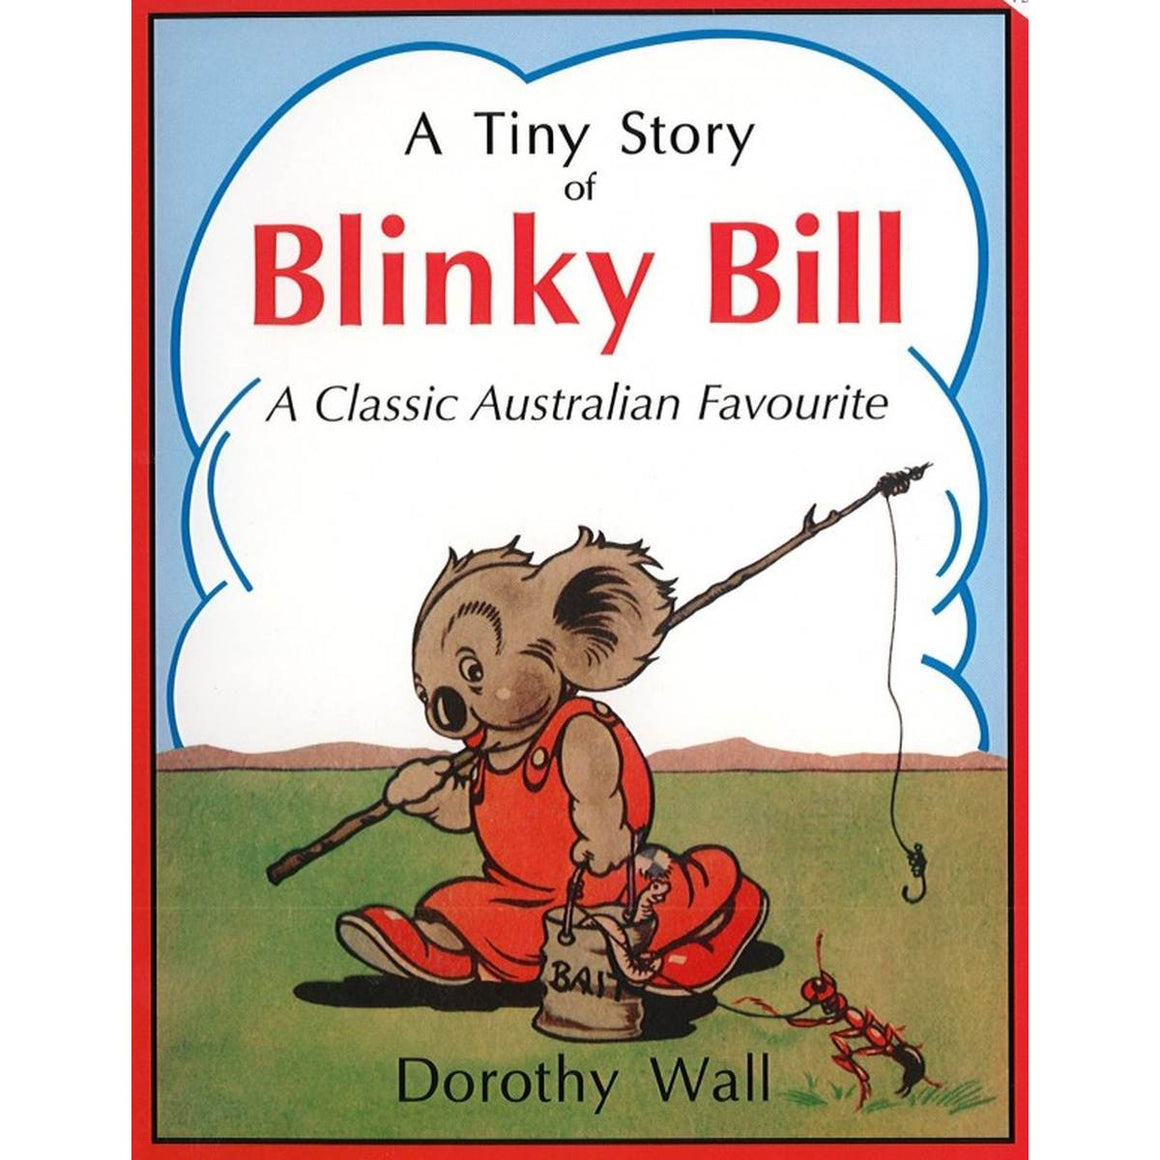 A book cover featuring a vintage illustration of Blinky Bill the Koala. He wears red overalls and He is walking in a field, carrying a fishing rod and bucket of bait. A Small Red Ant walks beside him. In the background there is a mountain range and clouds.